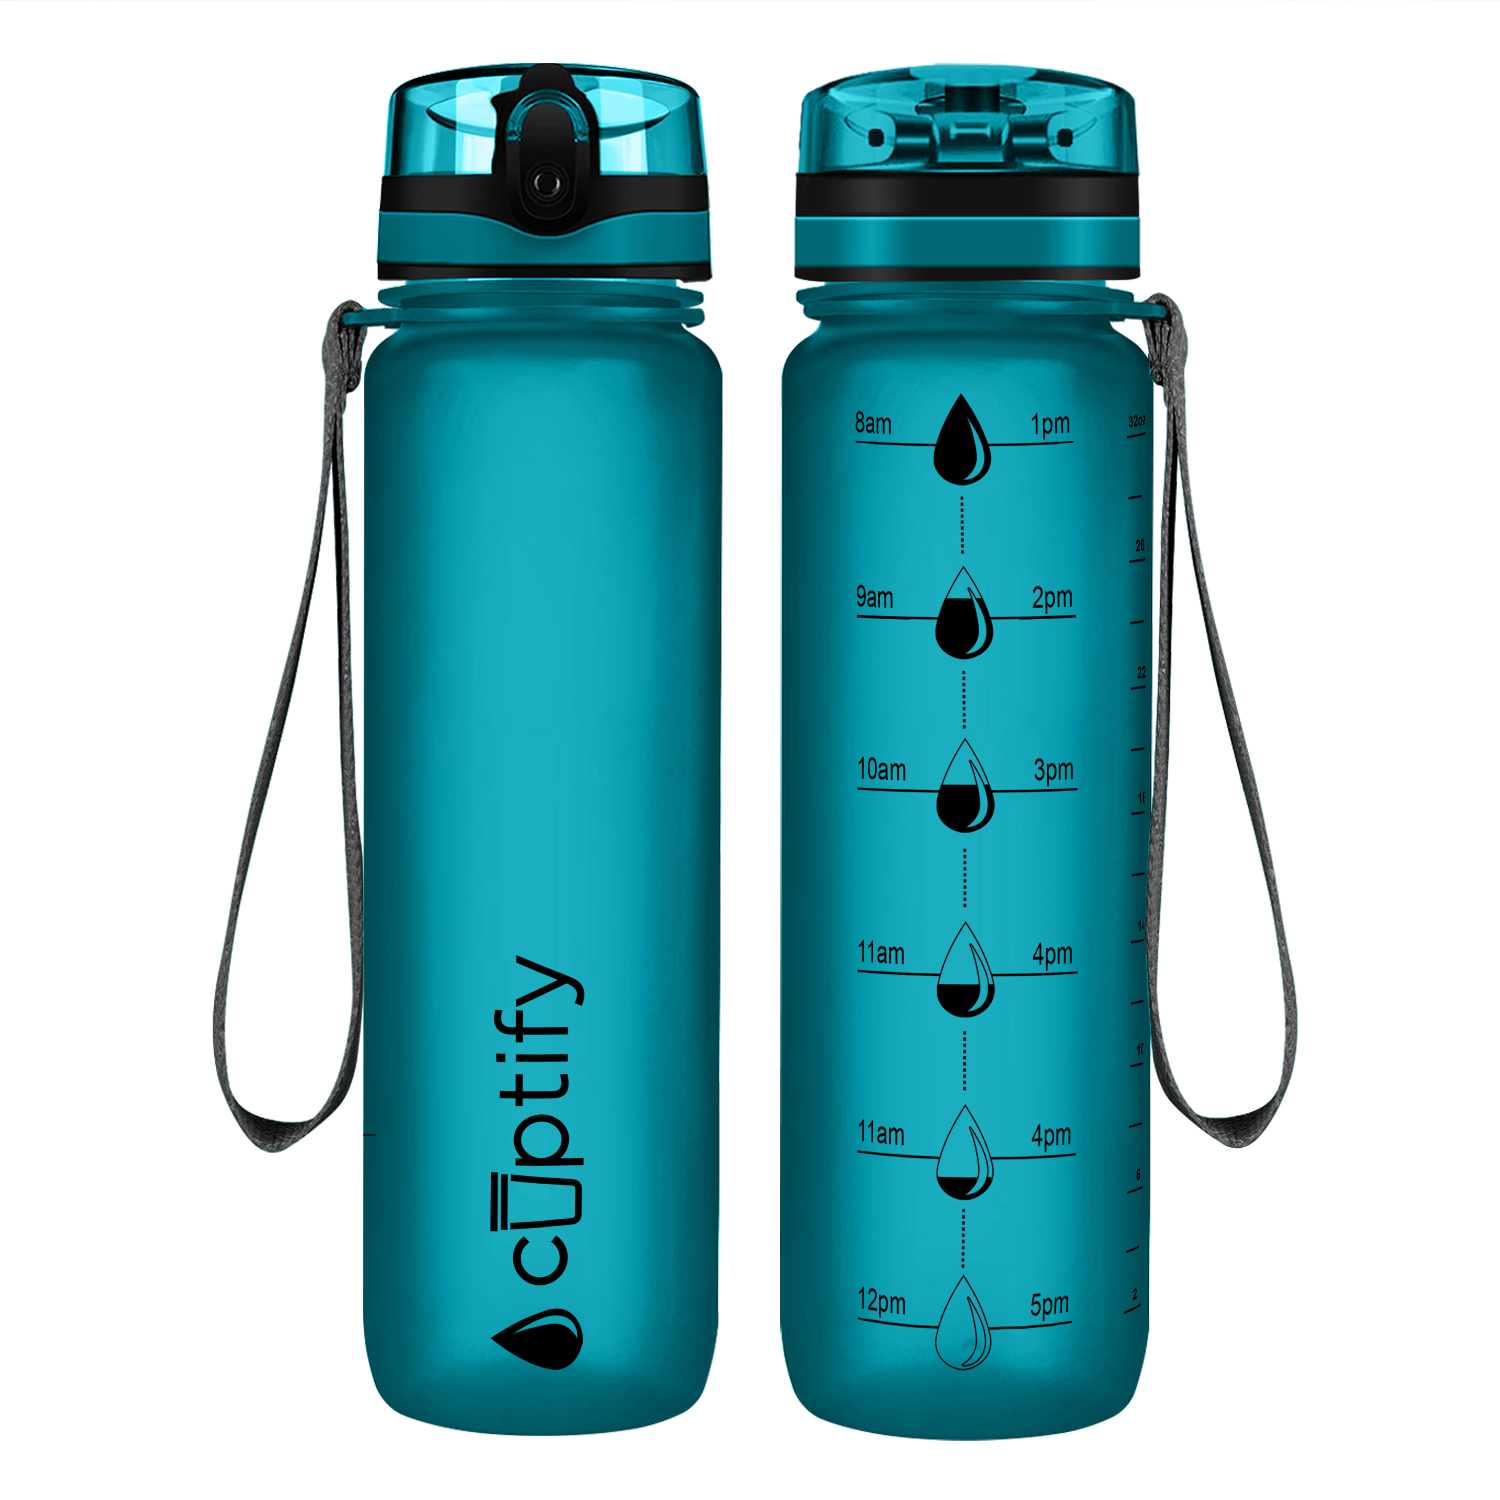 Cuptify Teal Frosted Hydration Tracker Water Bottle